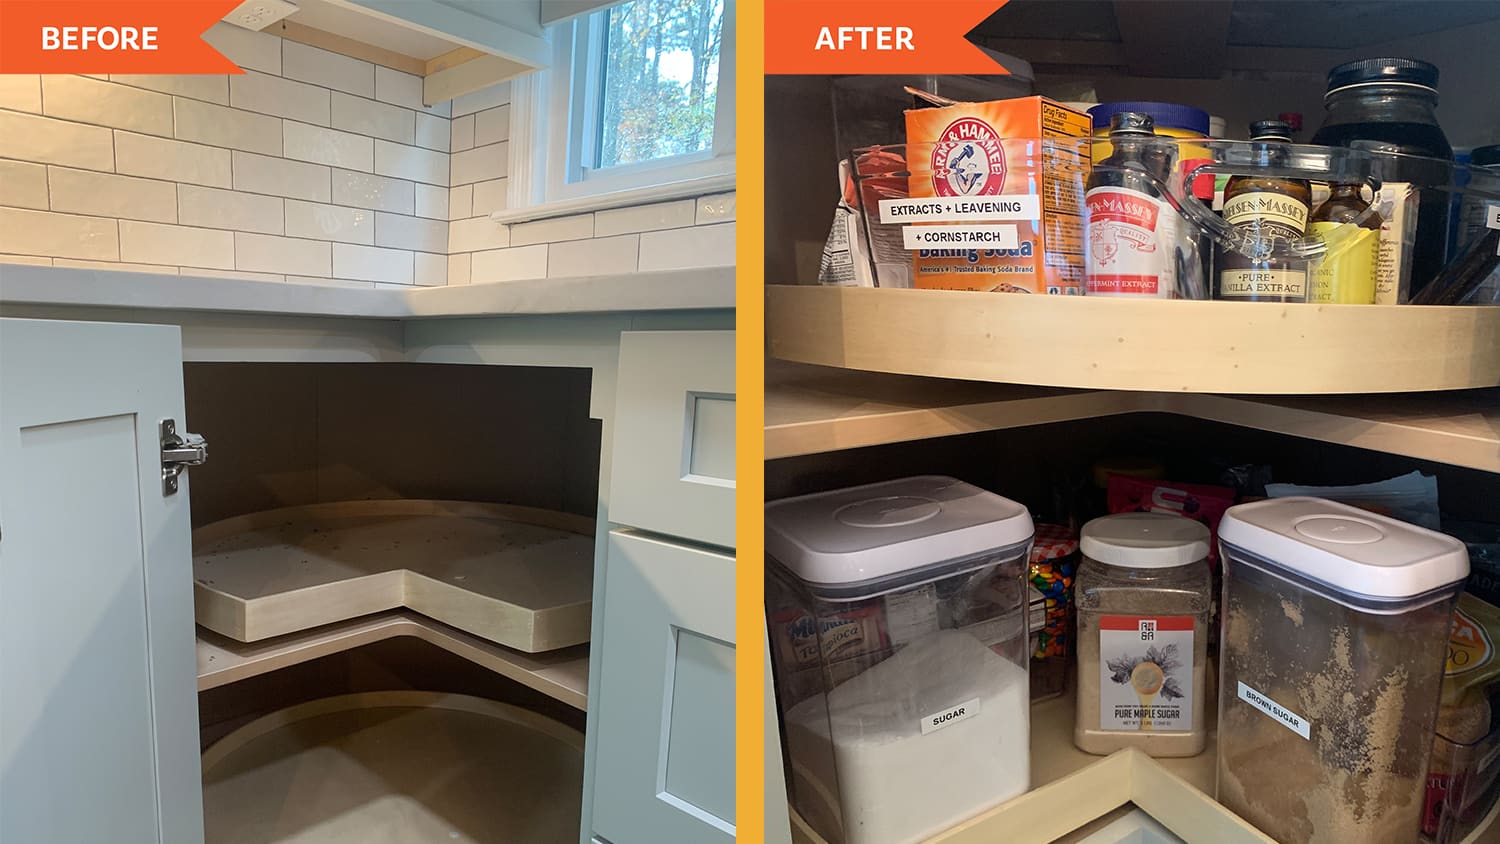 https://cdn.apartmenttherapy.info/image/upload/f_jpg,q_auto:eco,c_fill,g_auto,w_1500,ar_16:9/k%2FEdit%2F2022-01-PattyC-Before-And-After-Kitchen-Cabinets%2FLazy-Susan-diptych